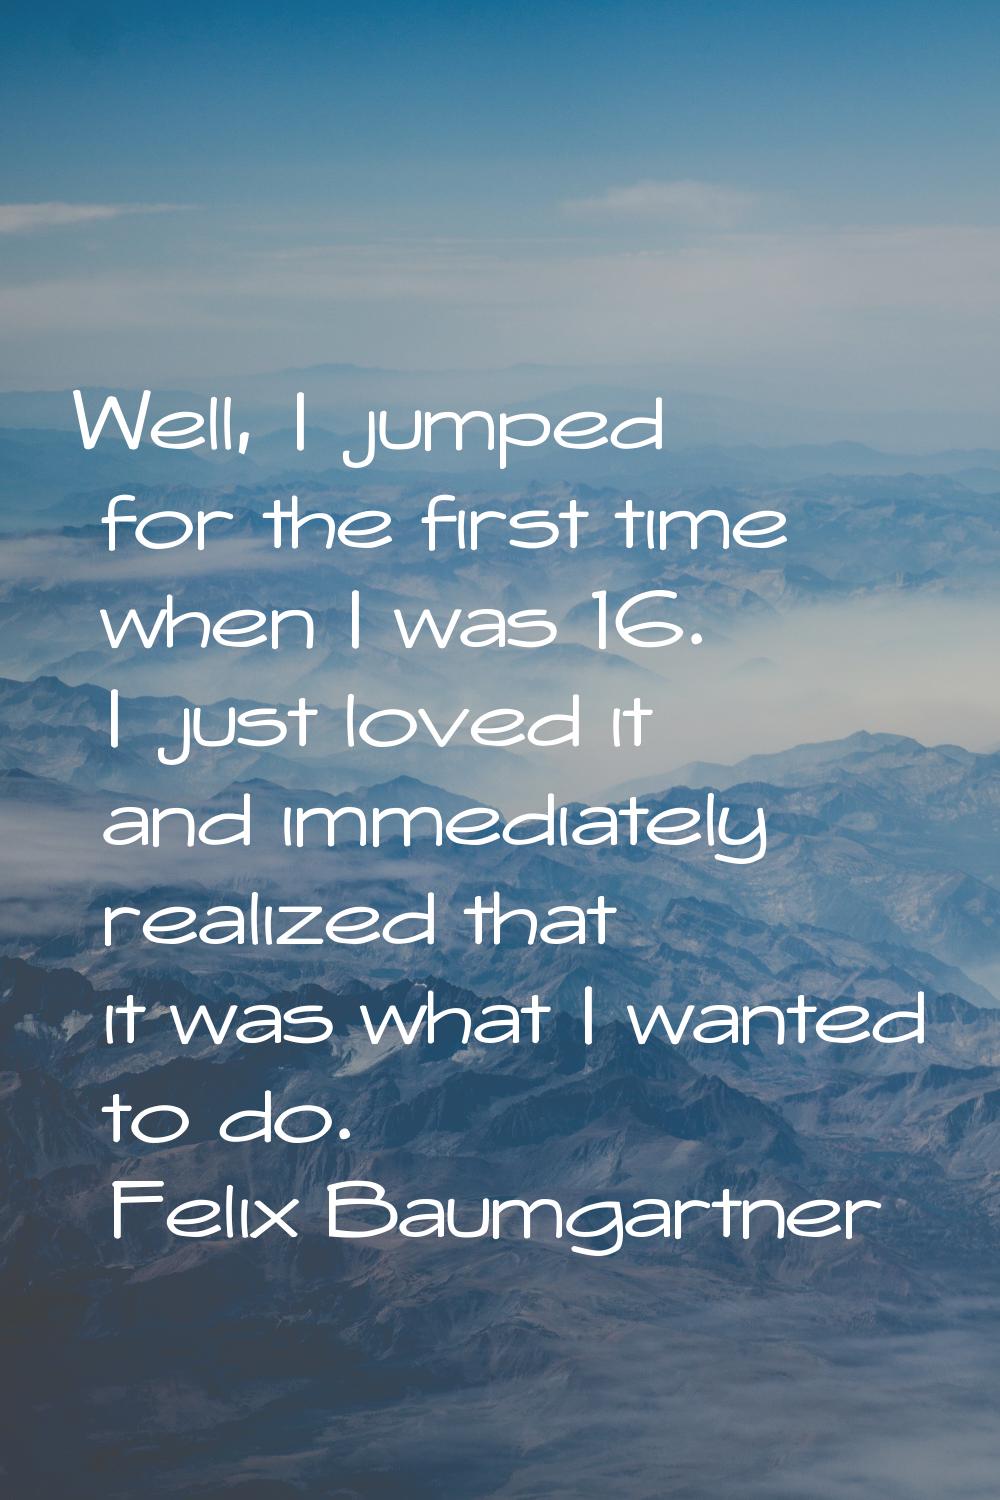 Well, I jumped for the first time when I was 16. I just loved it and immediately realized that it w